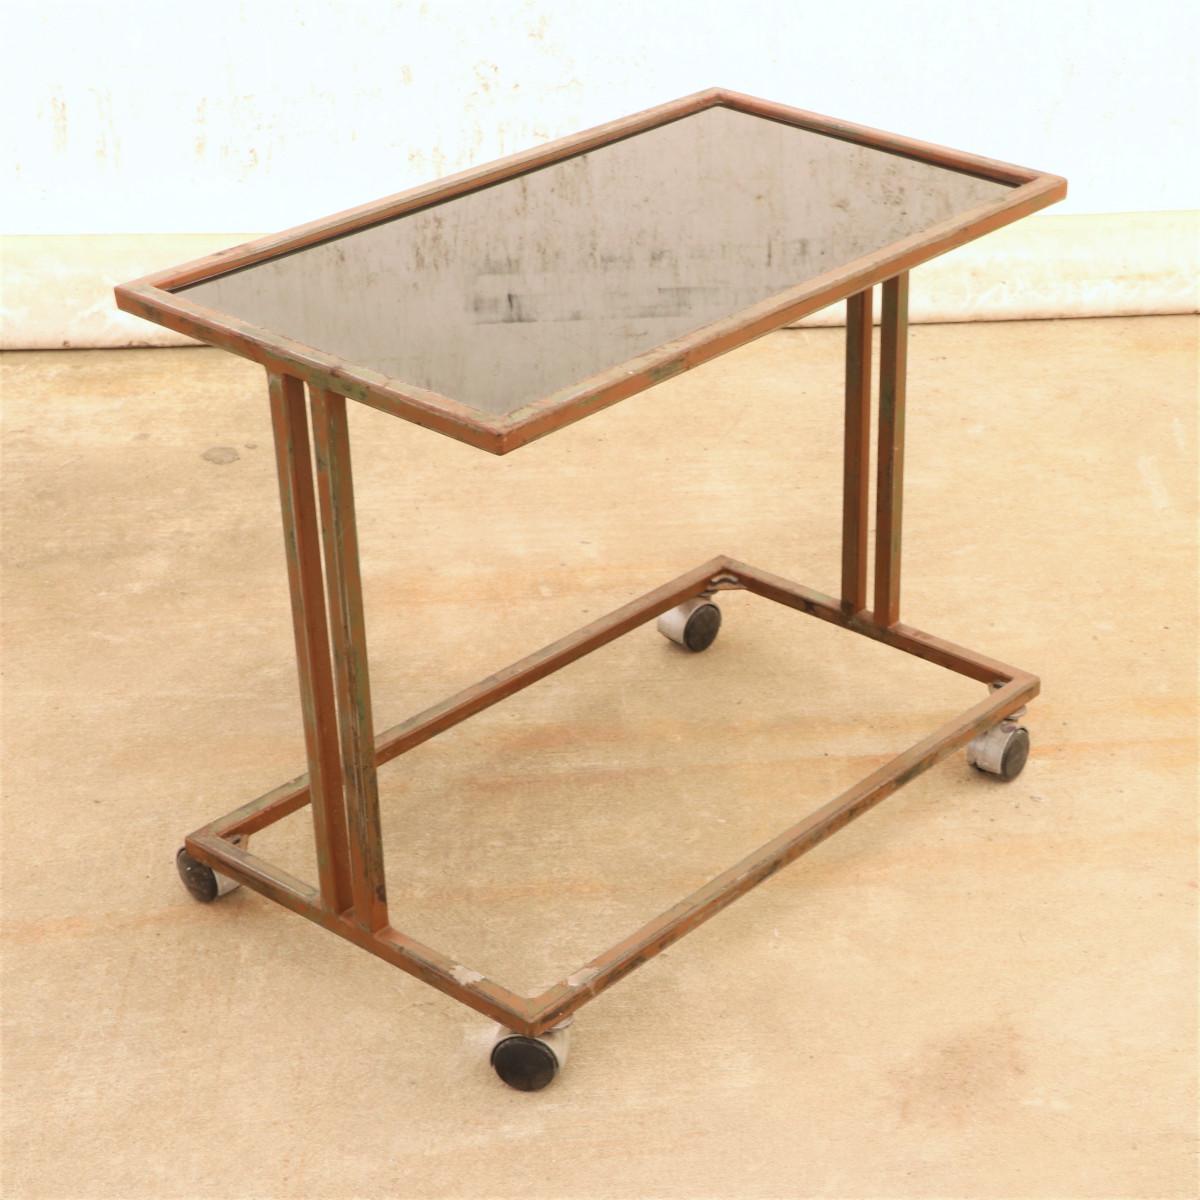 Iron Czechoslovak Industrial Serving Trolley on Wheels from the 1970s For Sale